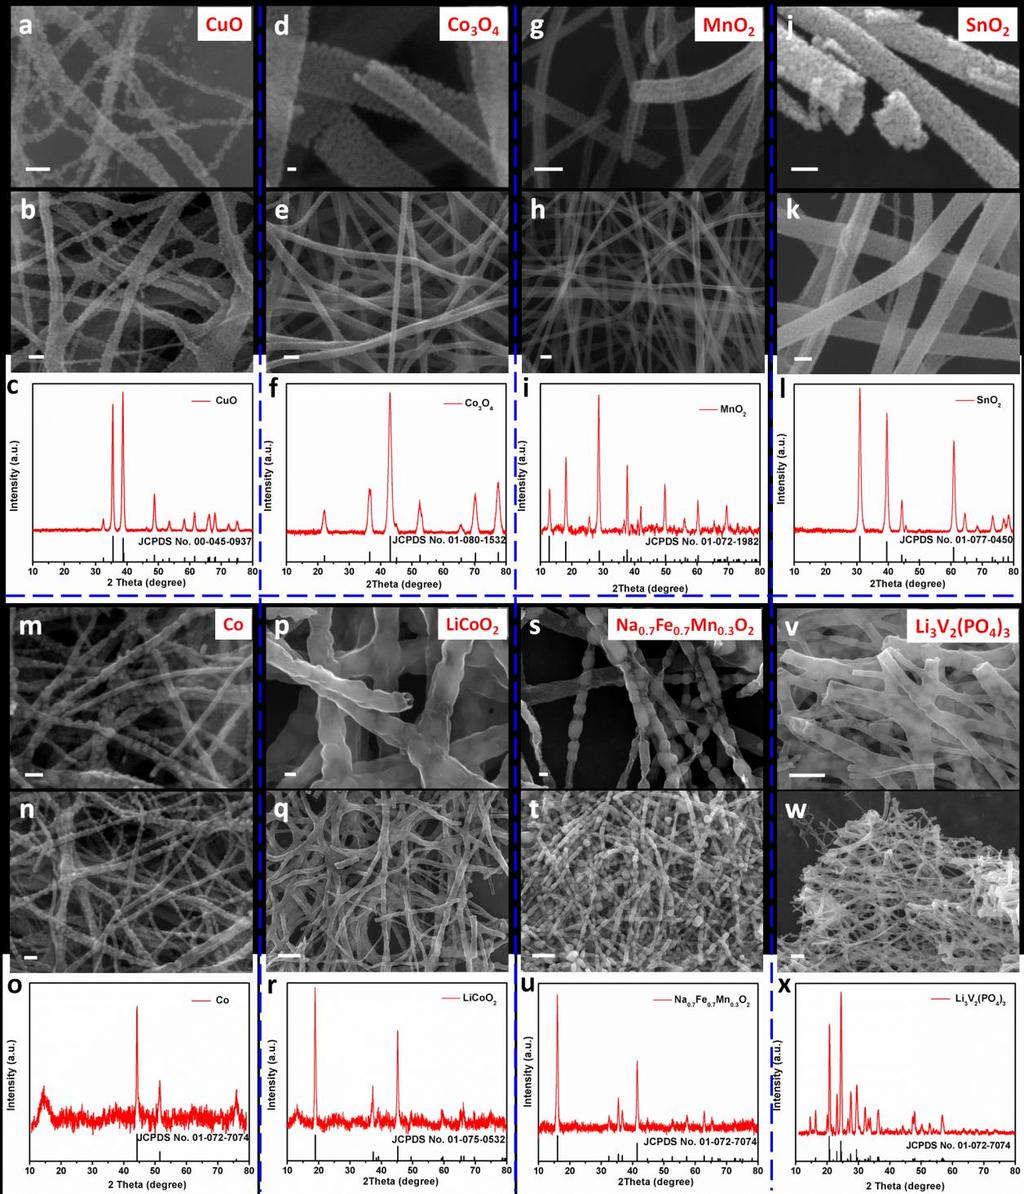 Supplementary Figure 3 SEM images and XRD patterns of single-metal oxides mesoporous nanotubes, CuO (a-c), Co 3 O 4 (d-f), MnO 2 (g-i), and SnO 2 (j-l), and pea-like nanotubes which